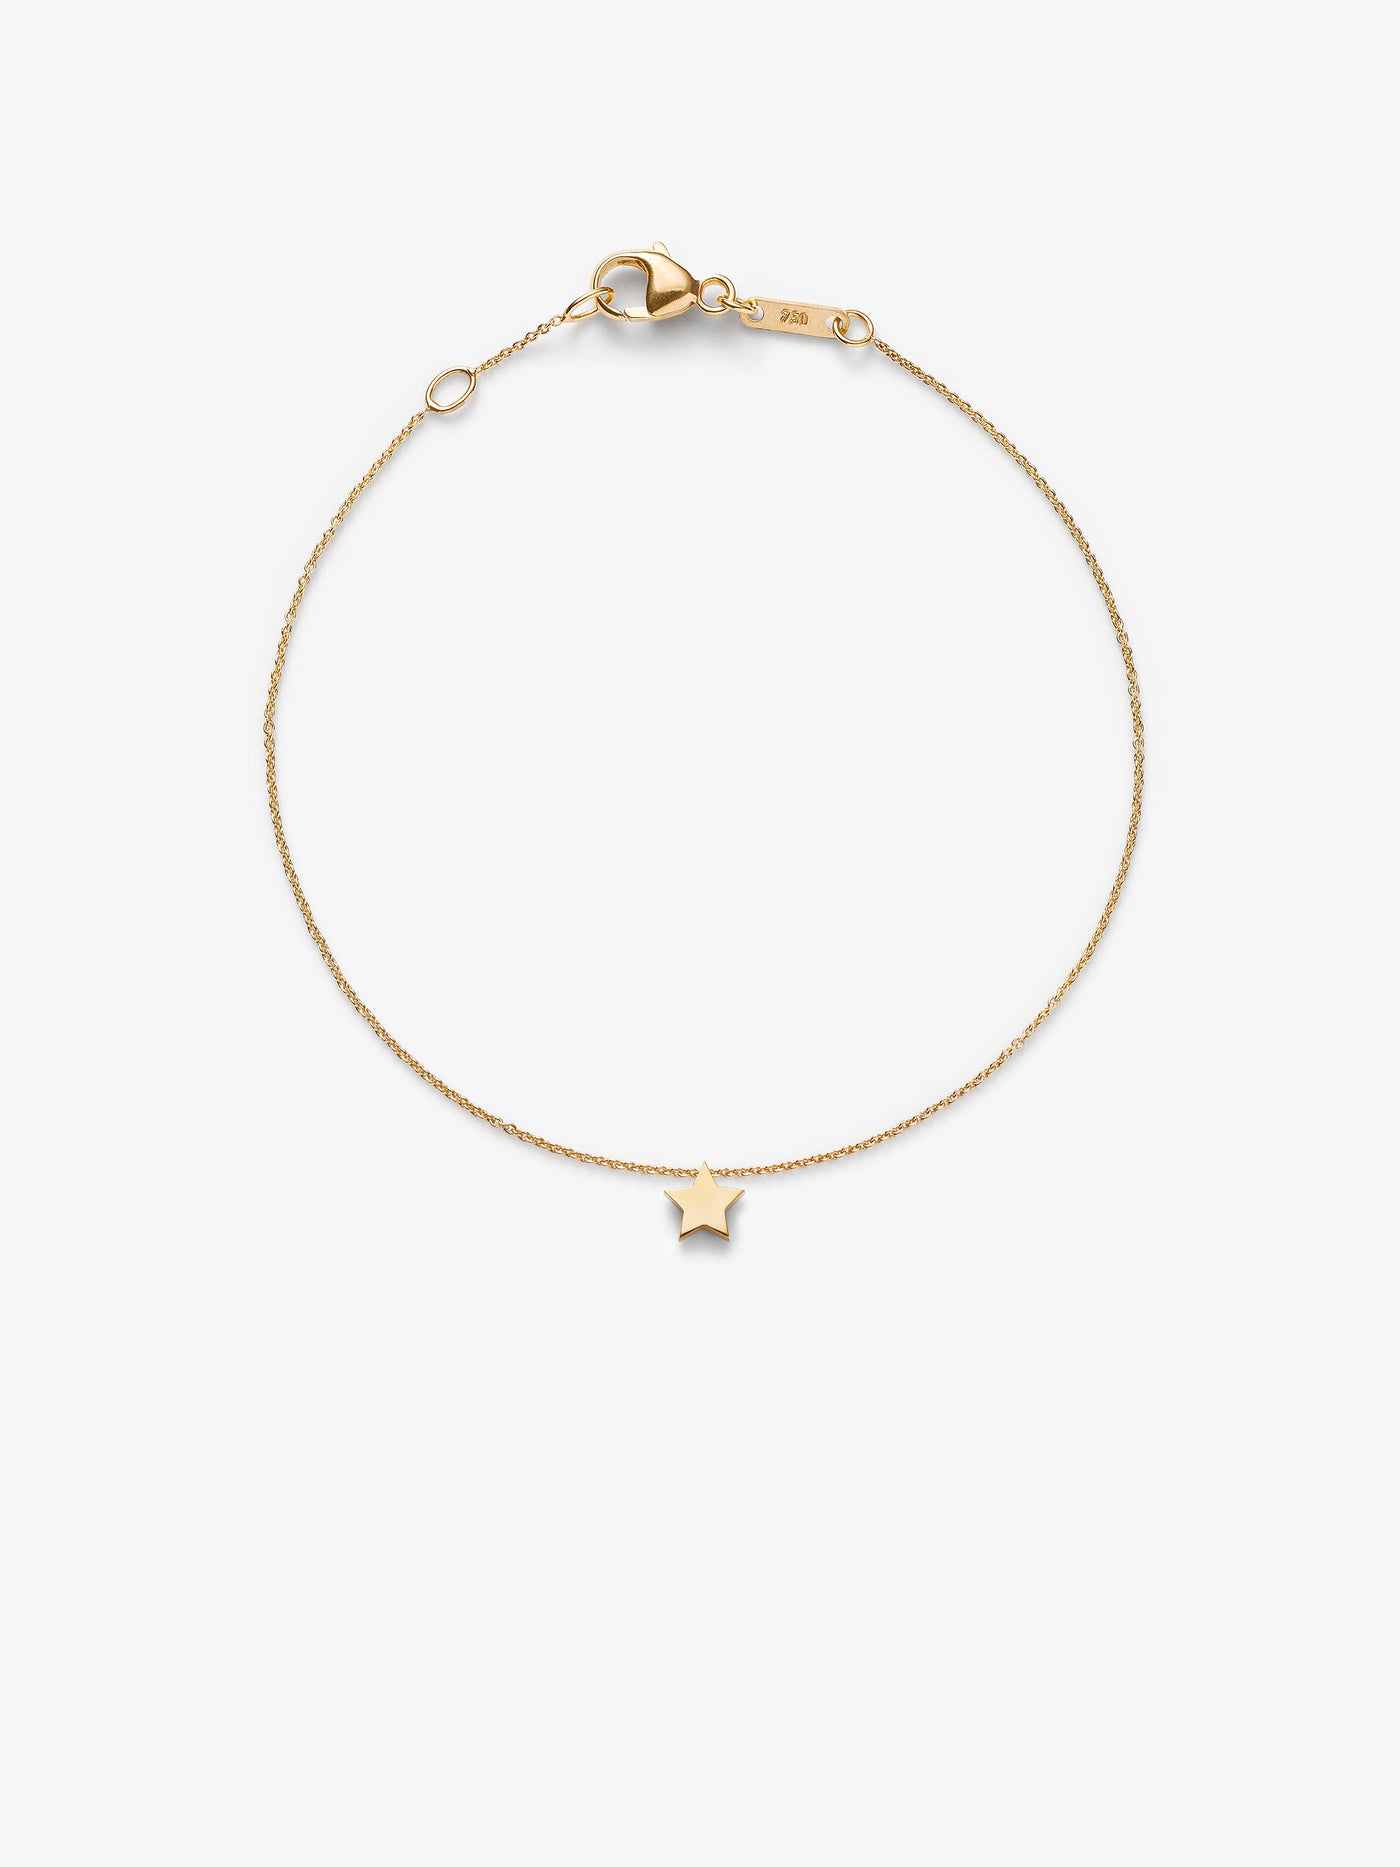 handcrafted Star bracelet with adjustable chain in 18k solid gold. 